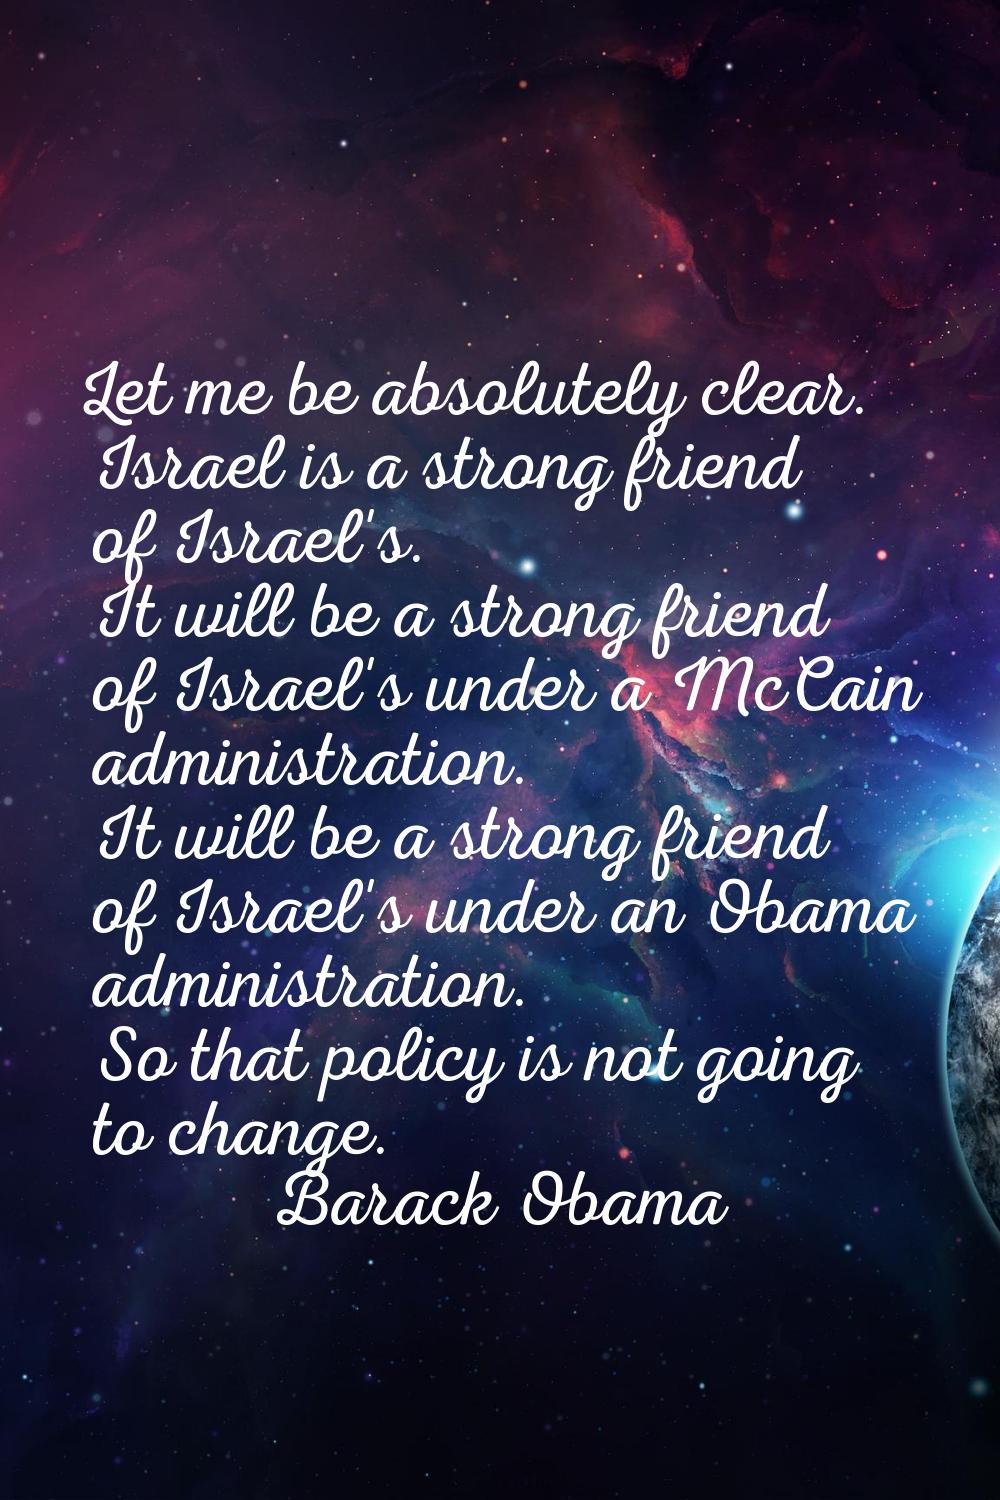 Let me be absolutely clear. Israel is a strong friend of Israel's. It will be a strong friend of Is